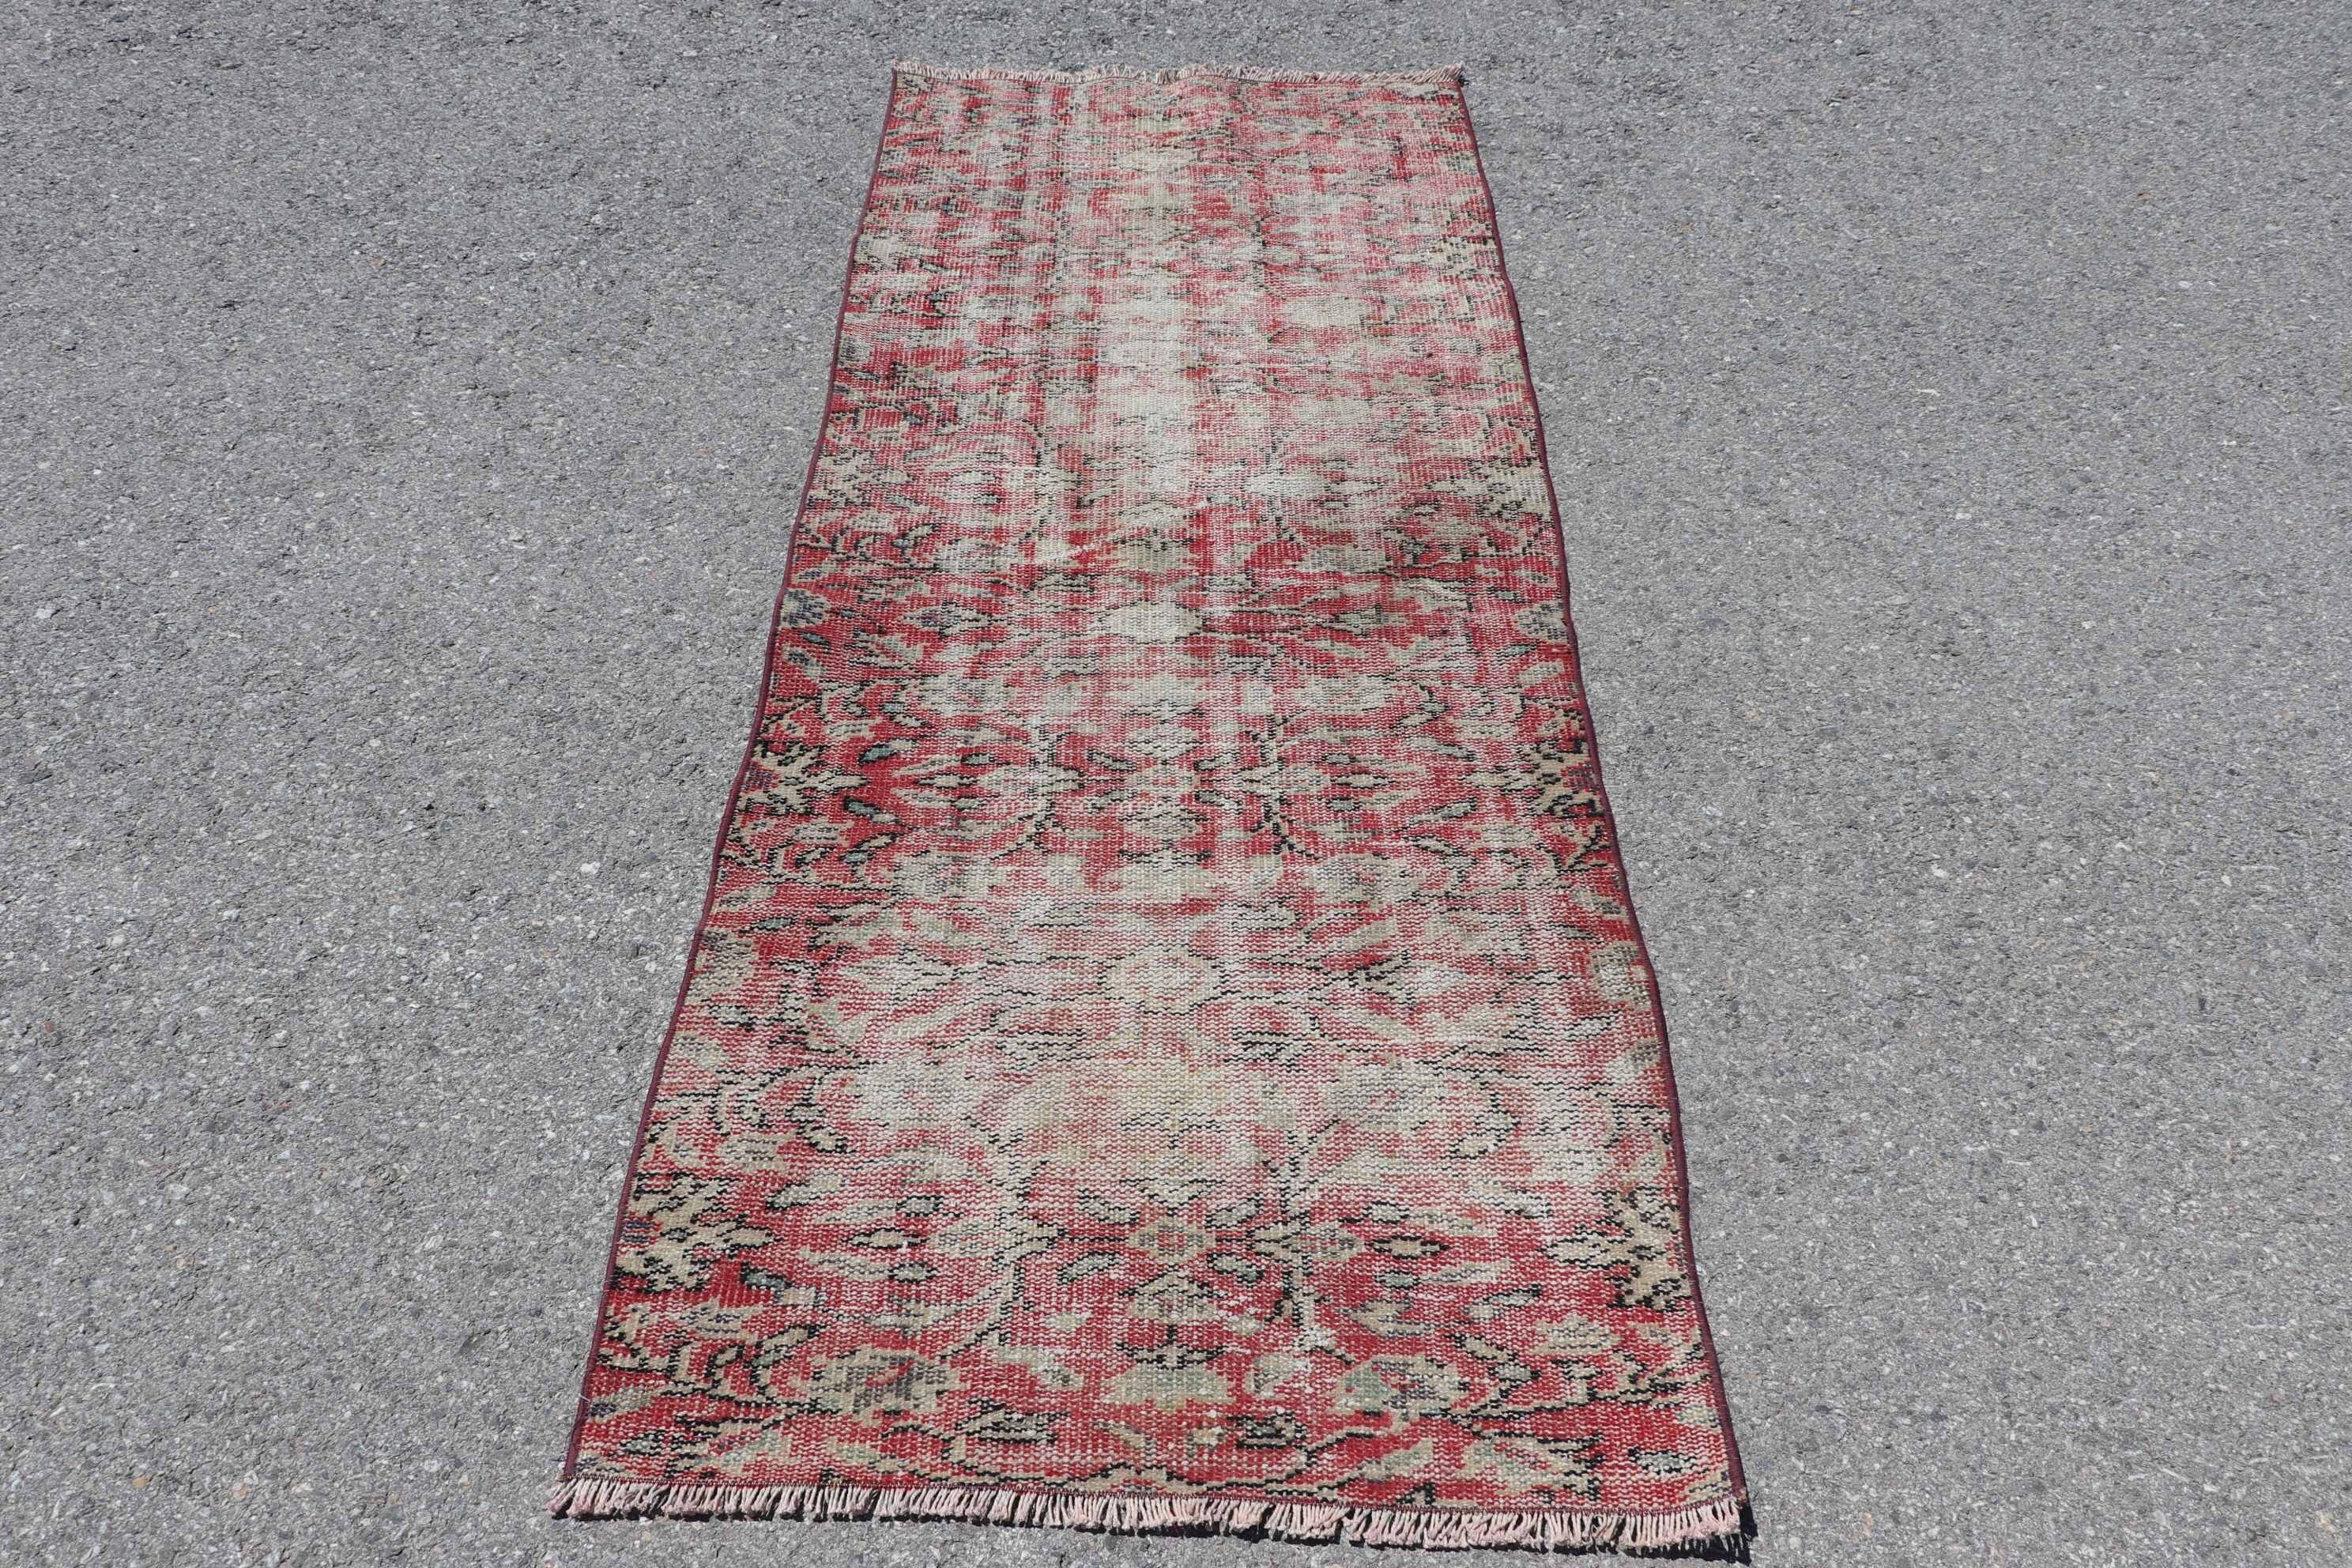 Anatolian Rug, Turkish Rug, Red Oriental Rug, Rugs for Bedroom, 2.7x6.6 ft Accent Rug, Kitchen Rugs, Vintage Rug, Entry Rug